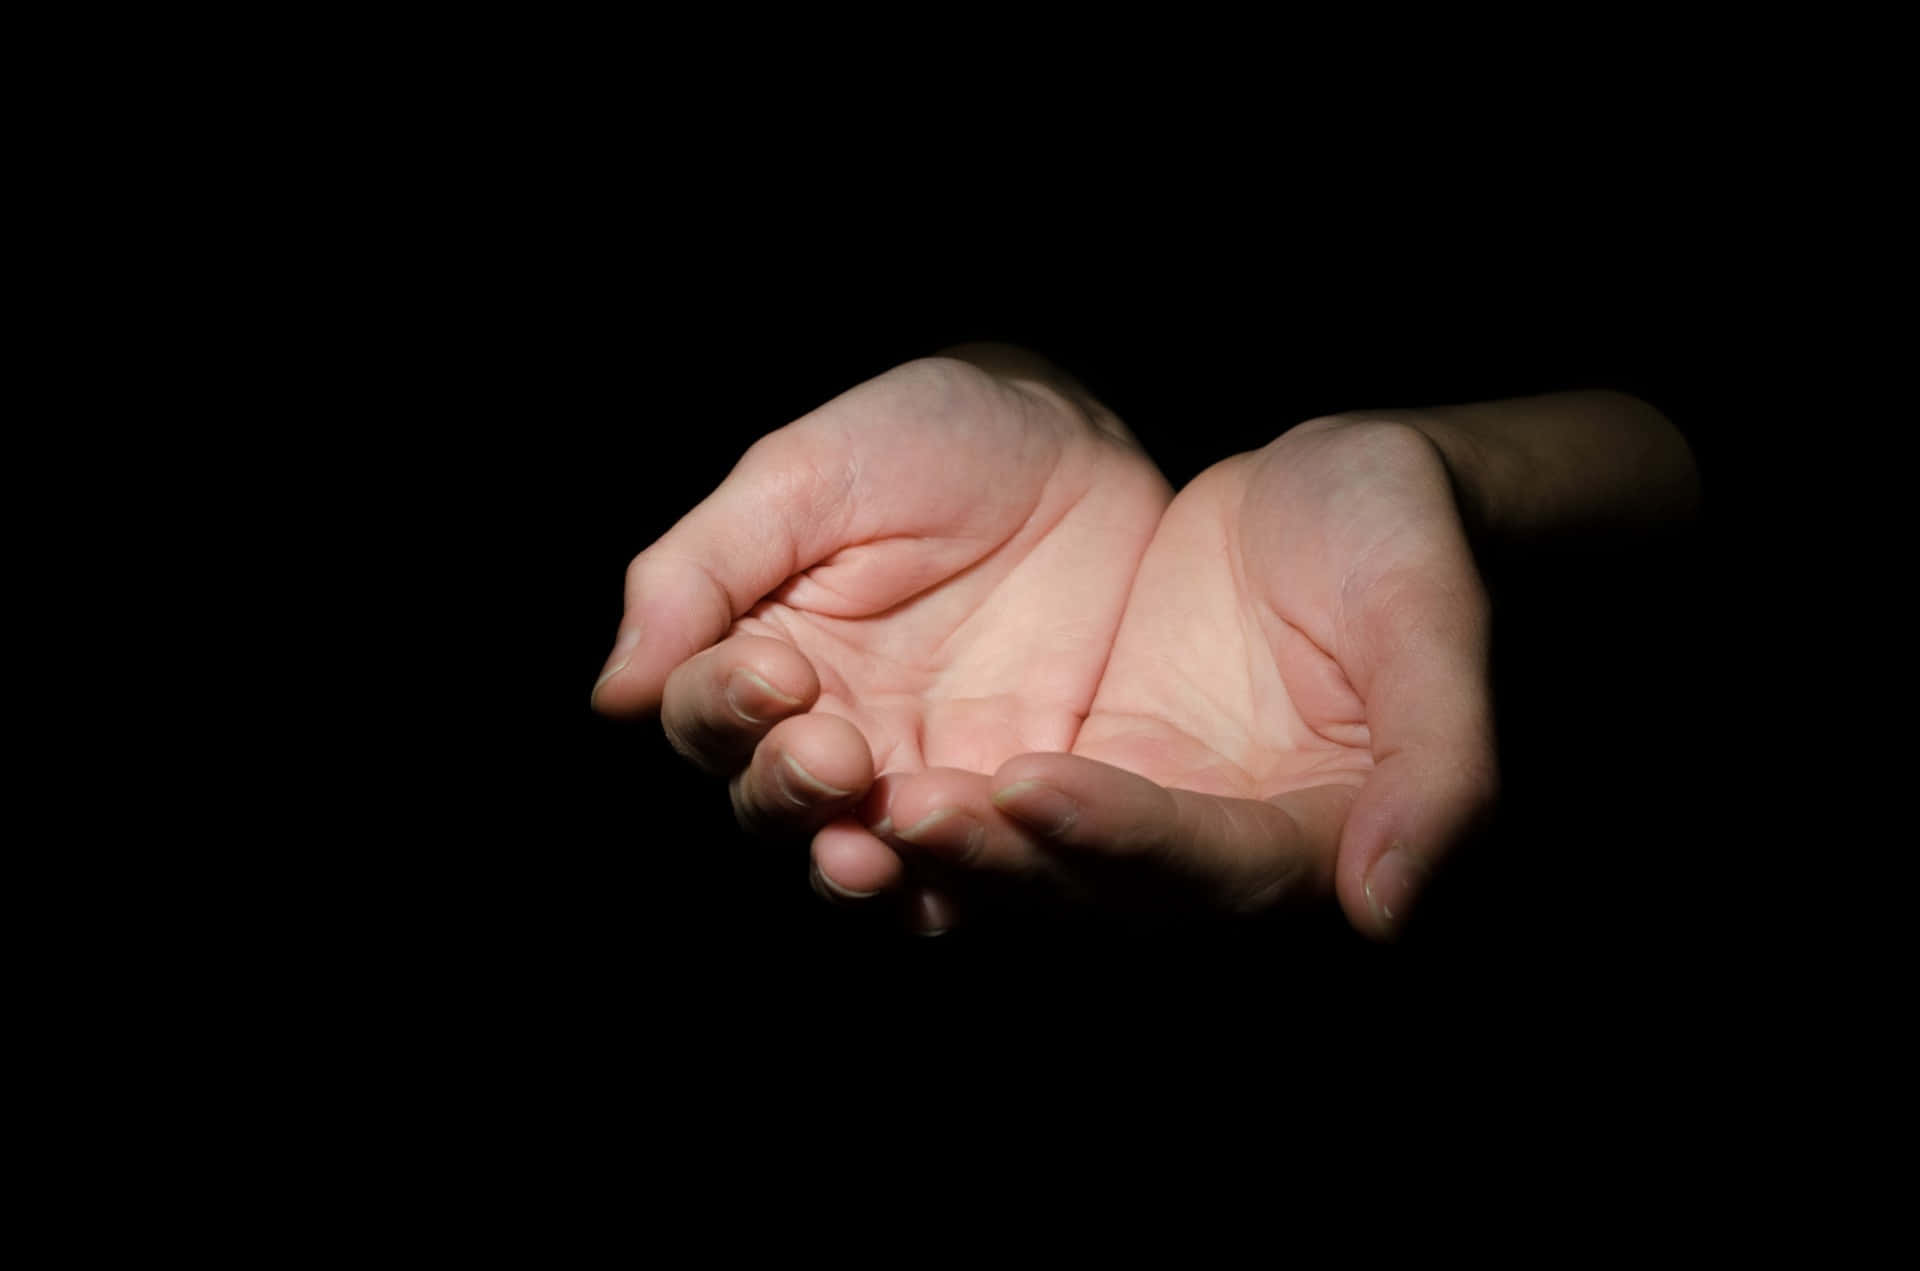 A pair of hands reaching out to each other against an abstract blue-green background